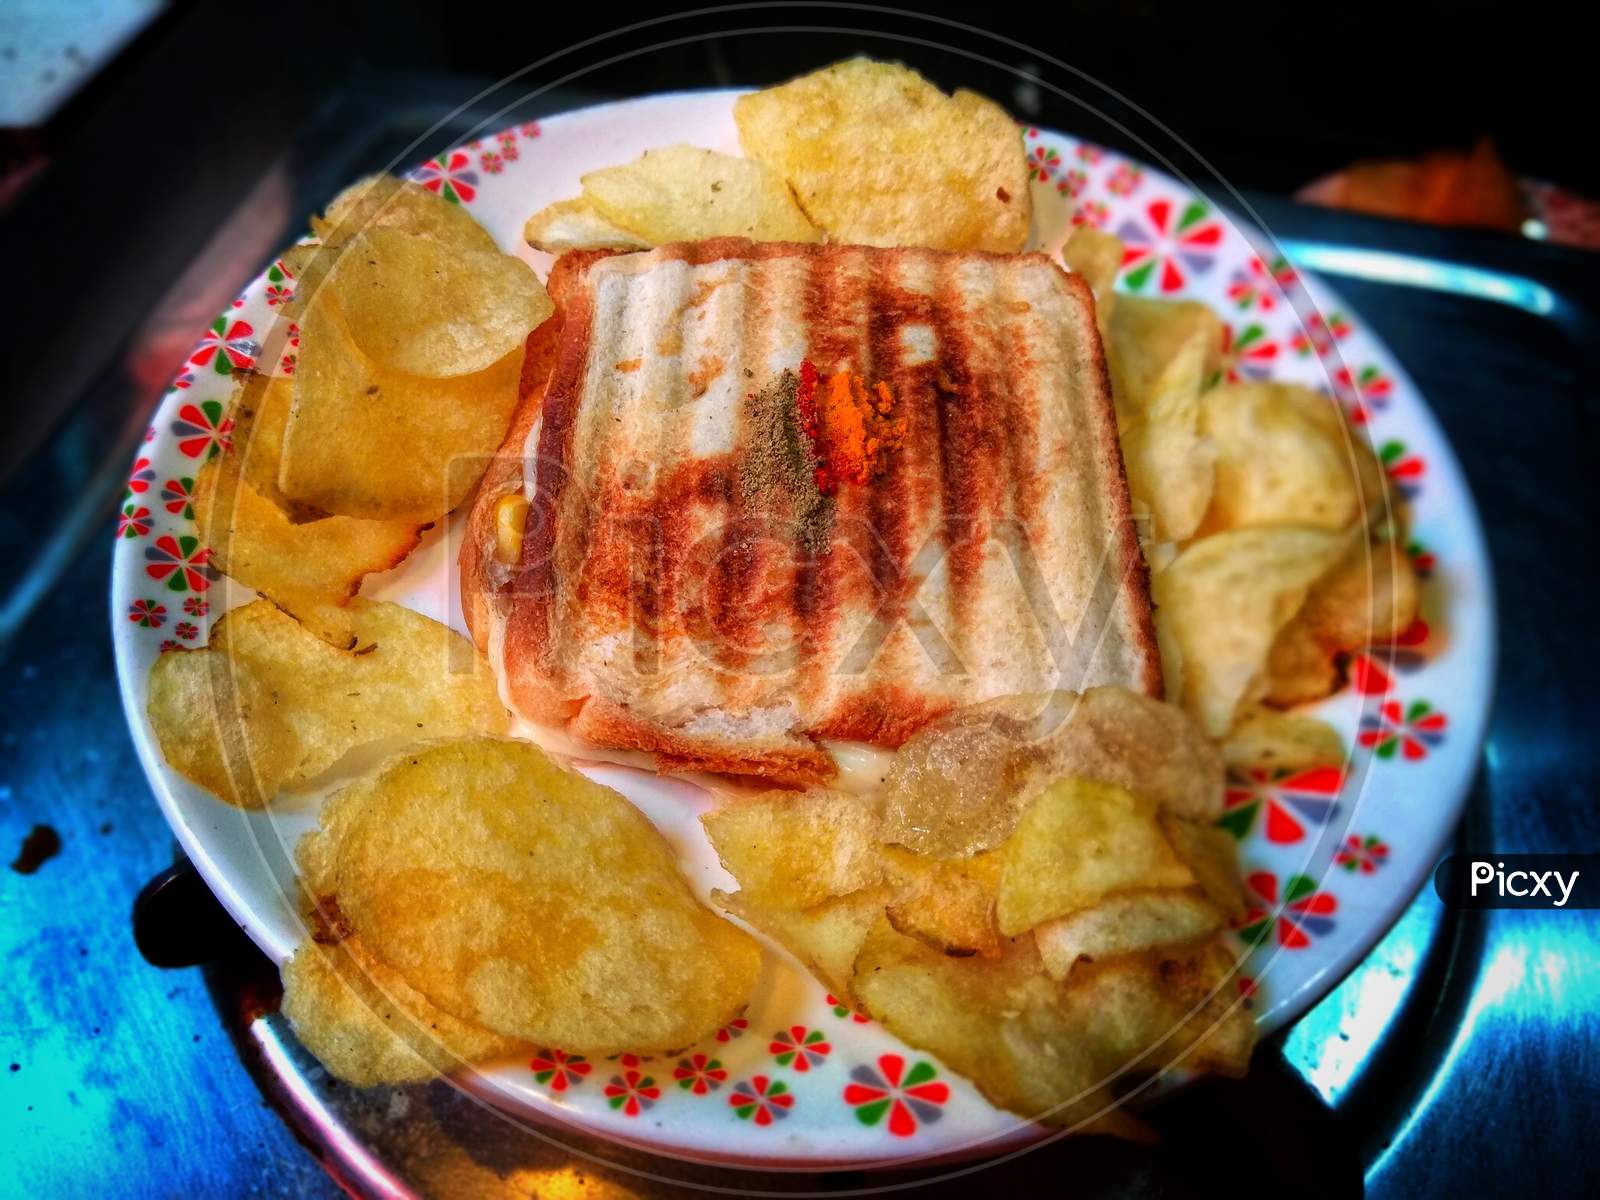 Bacon Lettuce And Tomato Sandwich With Potato Chips